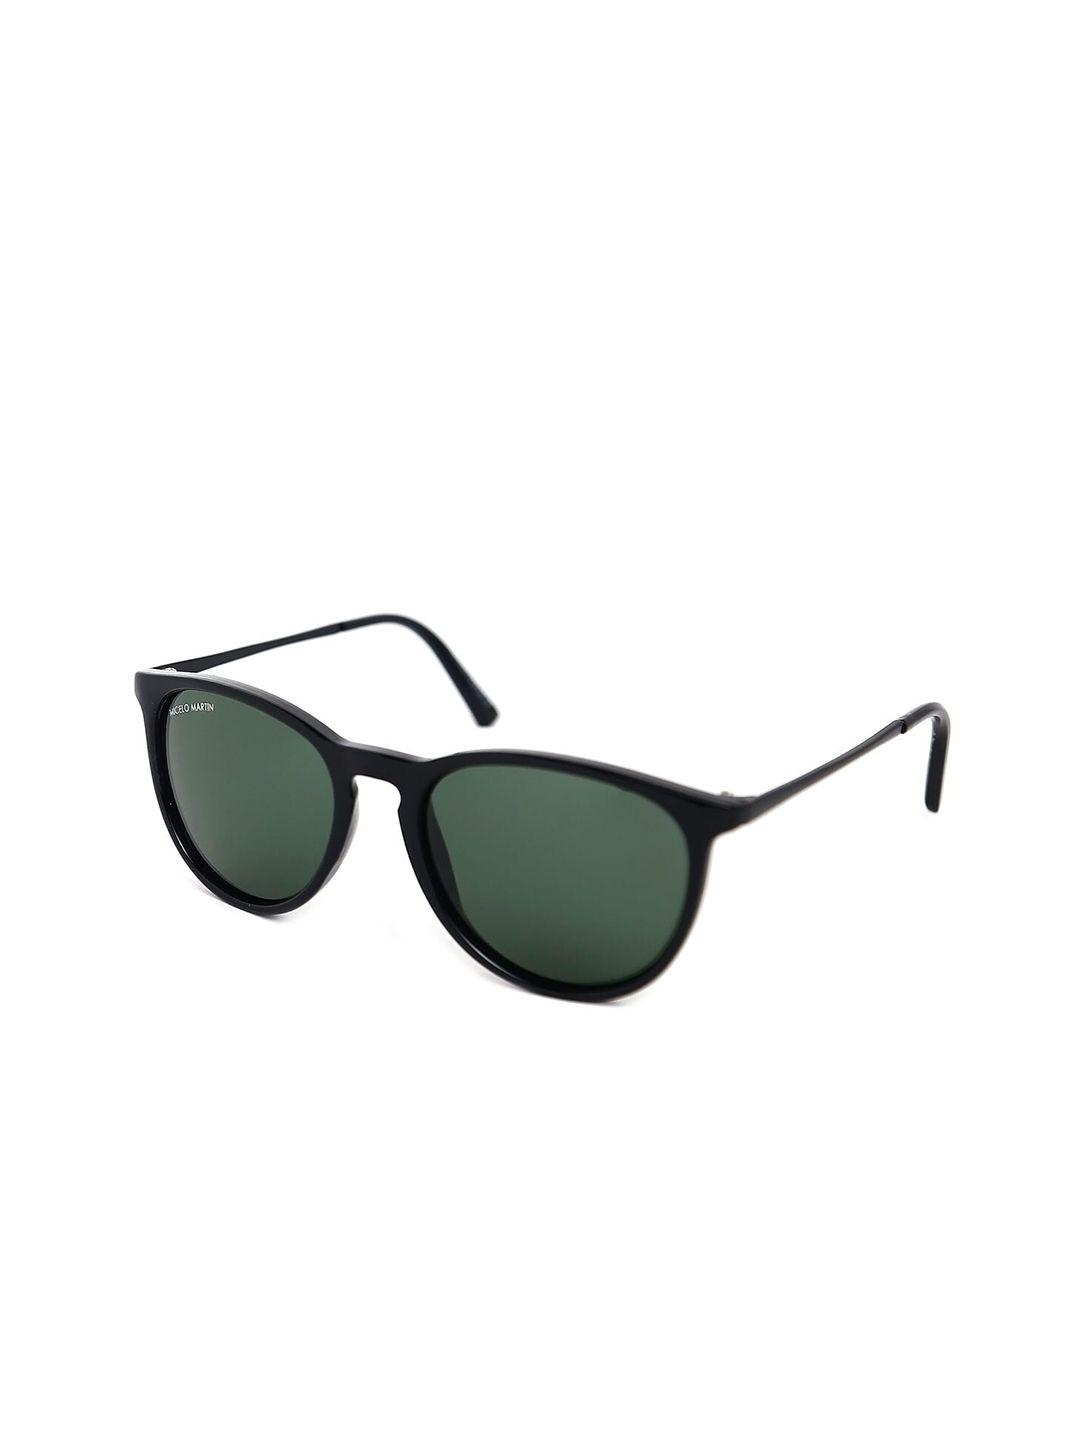 micelo martin unisex green lens & black round sunglasses with uv protected lens